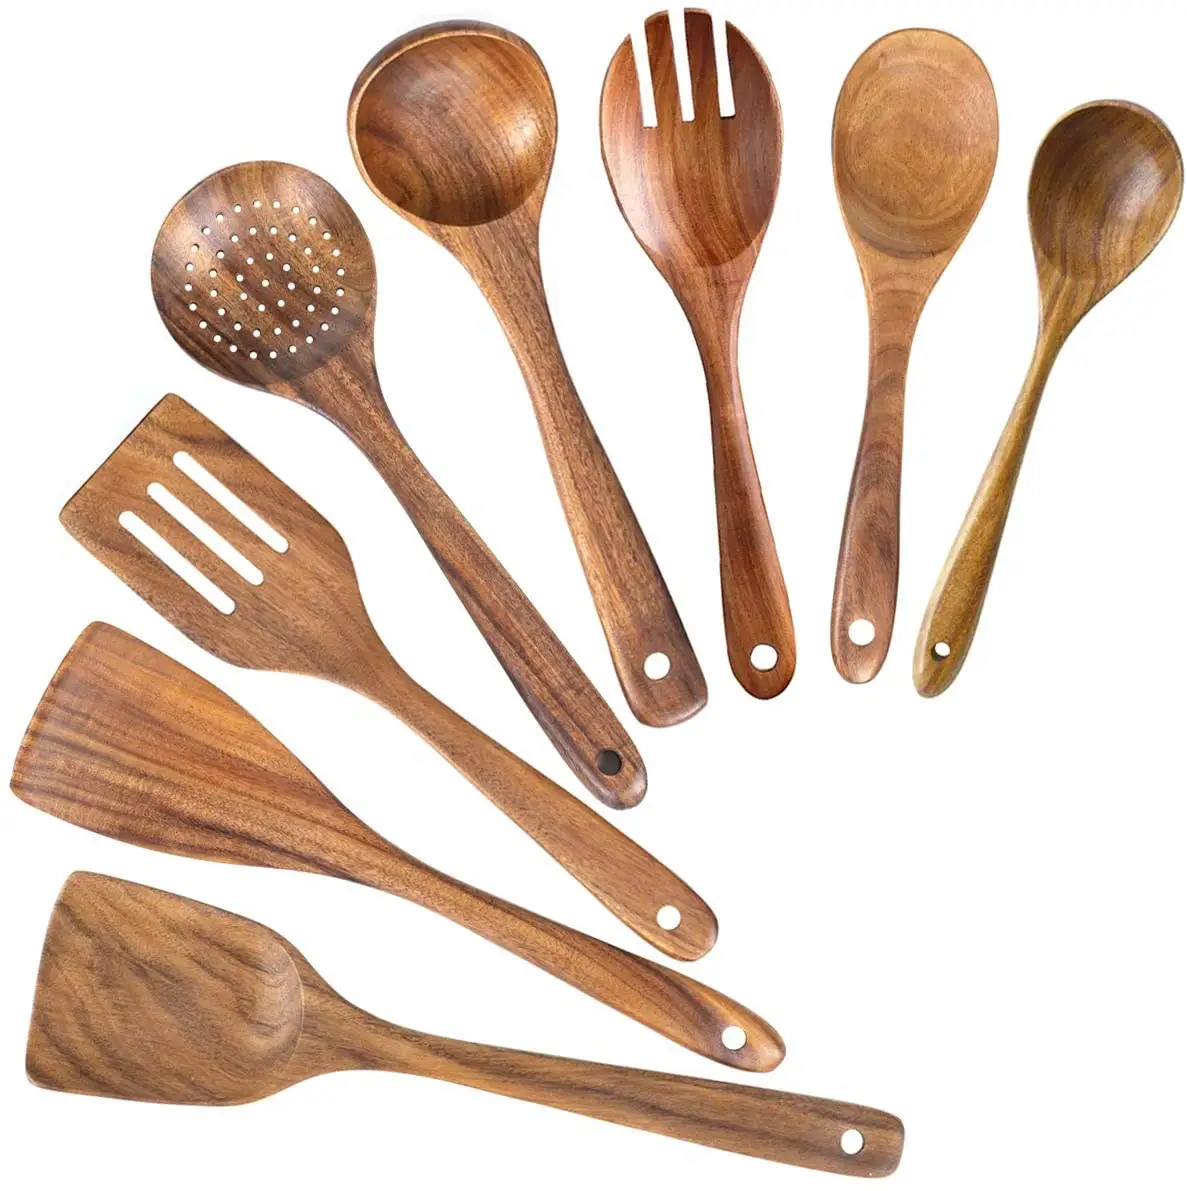 Premium Natural Teak Wood Slotted Spatulas Spoons Set Utensils For Cookware Kitchen Cooking